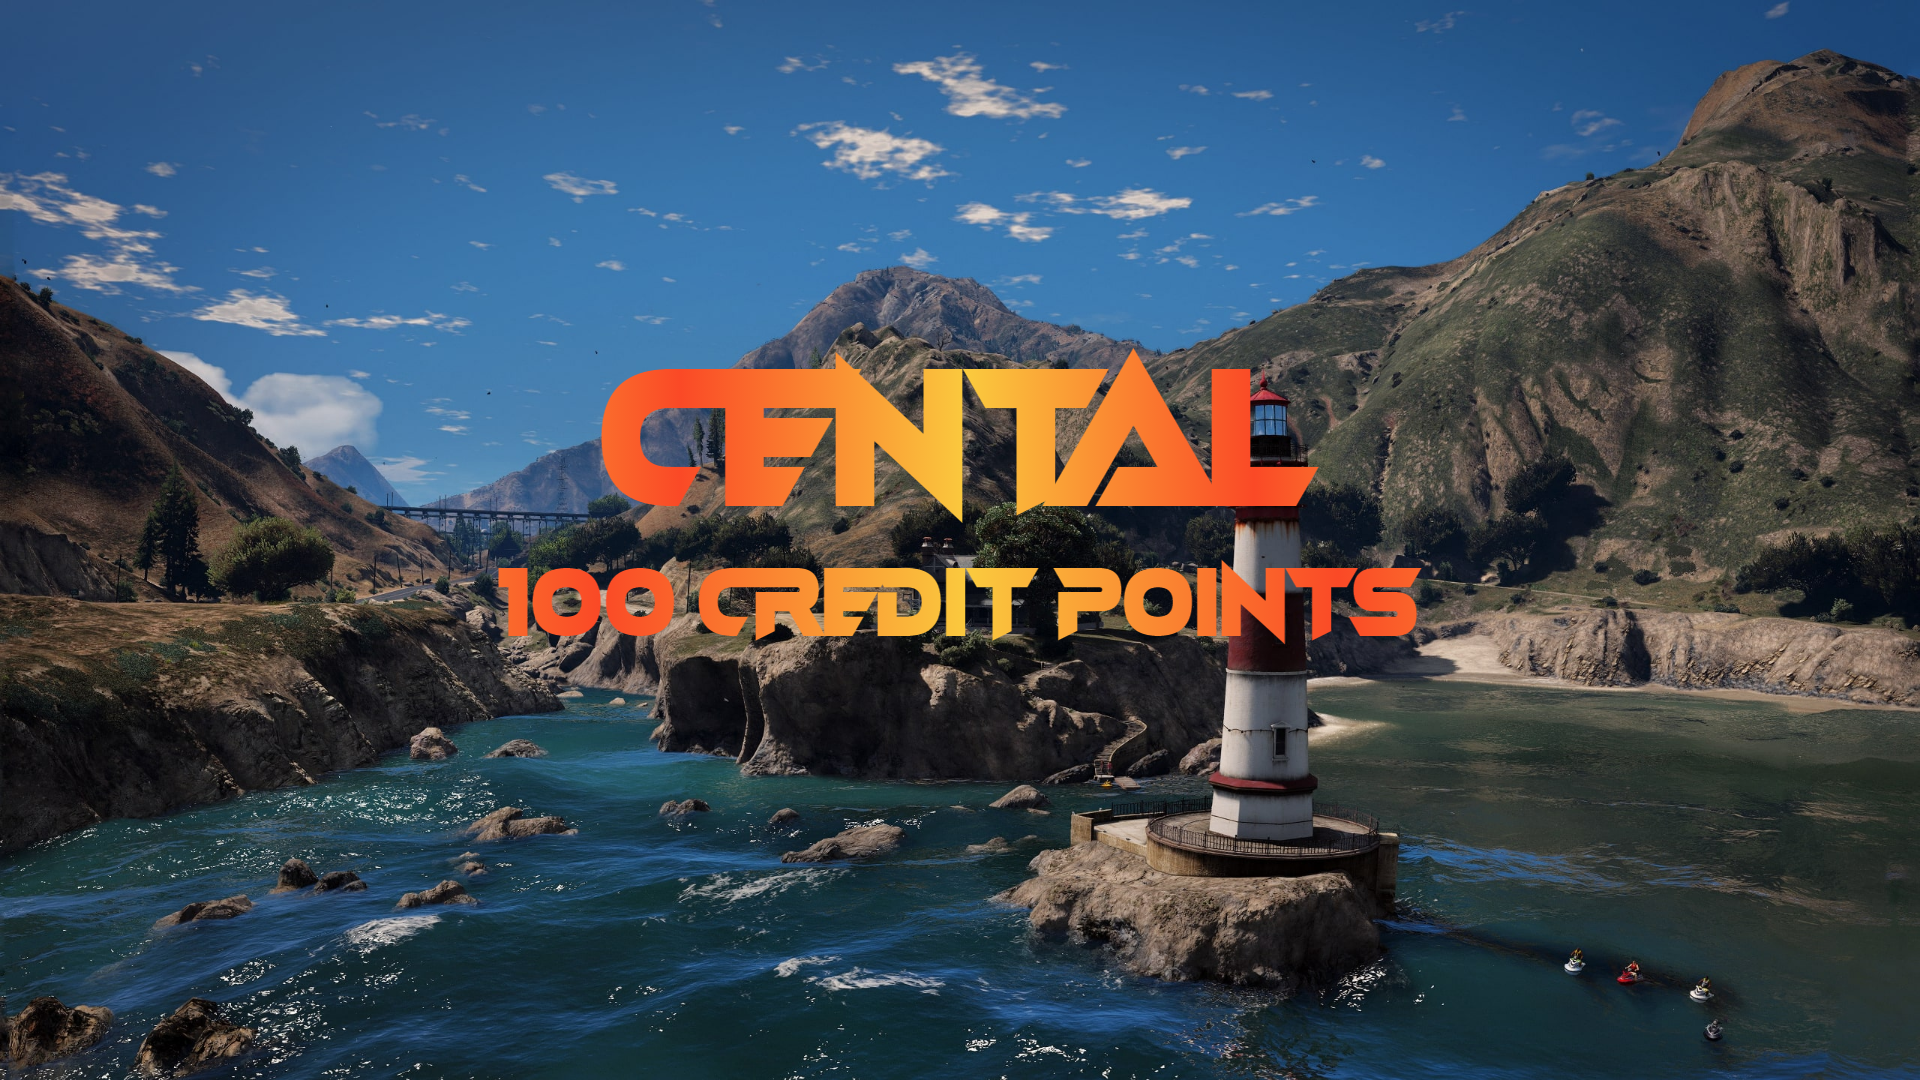 CentralRP - 100 Credit Points Gift Card